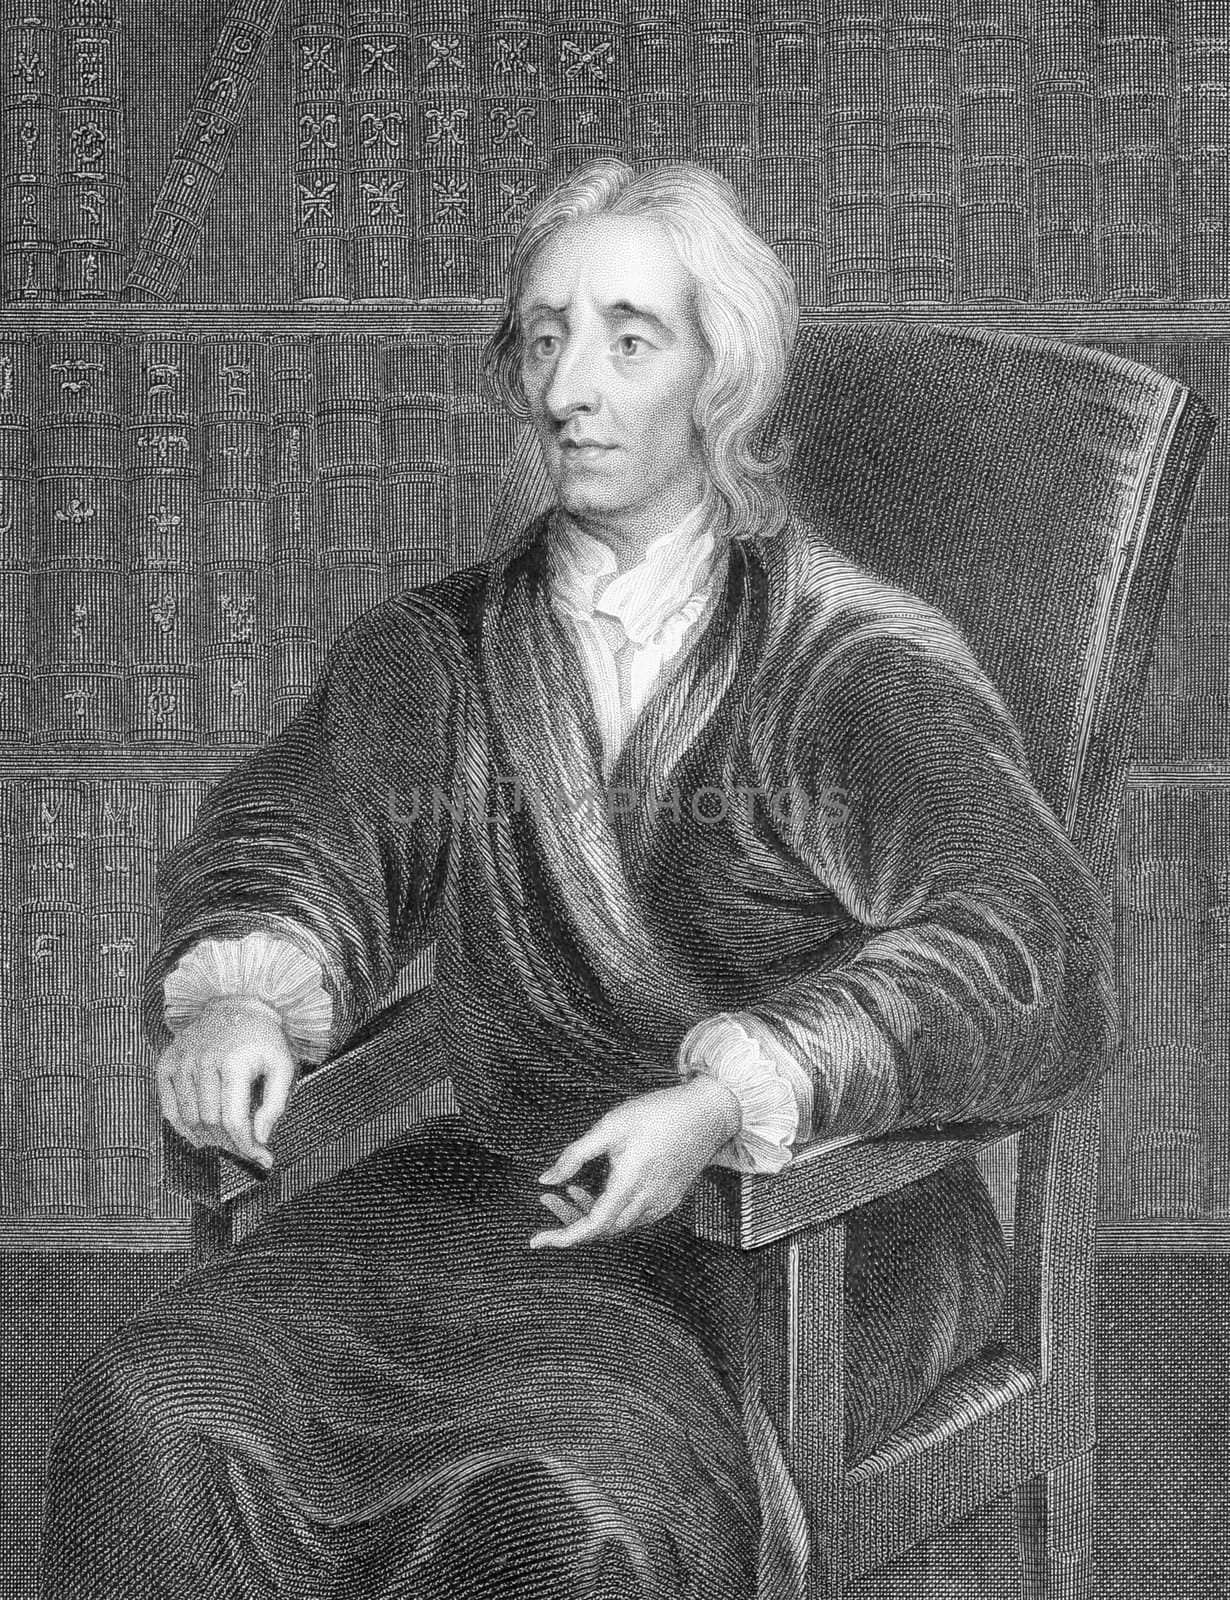 John Locke (1632-1704) on engraving from the 1800s.
English philosopher and physician, one of the most influential of Enlightenment thinkers. He is known as the Father of Liberalism. Engraved by H.Robinson and published by J.Tallis.